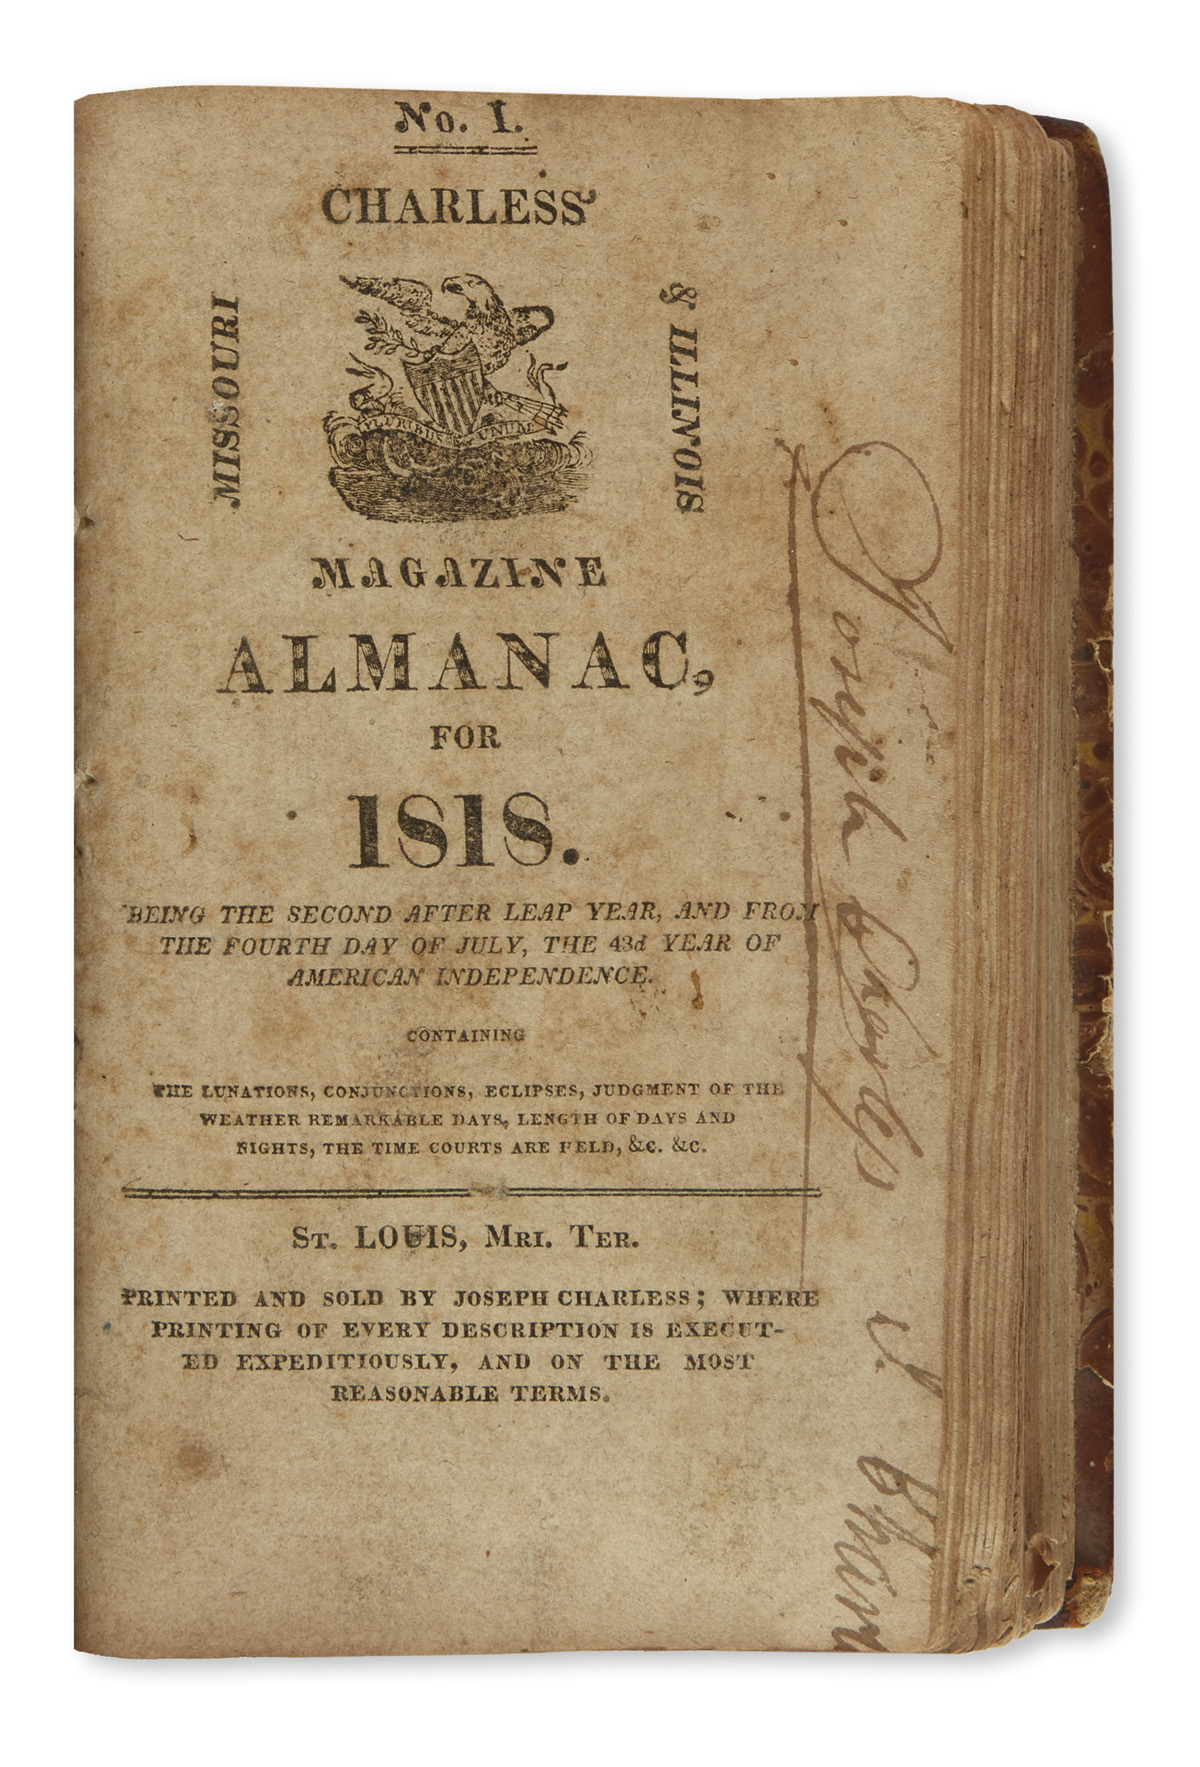 (ALMANACS.) Volume of early St. Louis and Pittsburgh almanacs, including the first one issued in St. Louis.